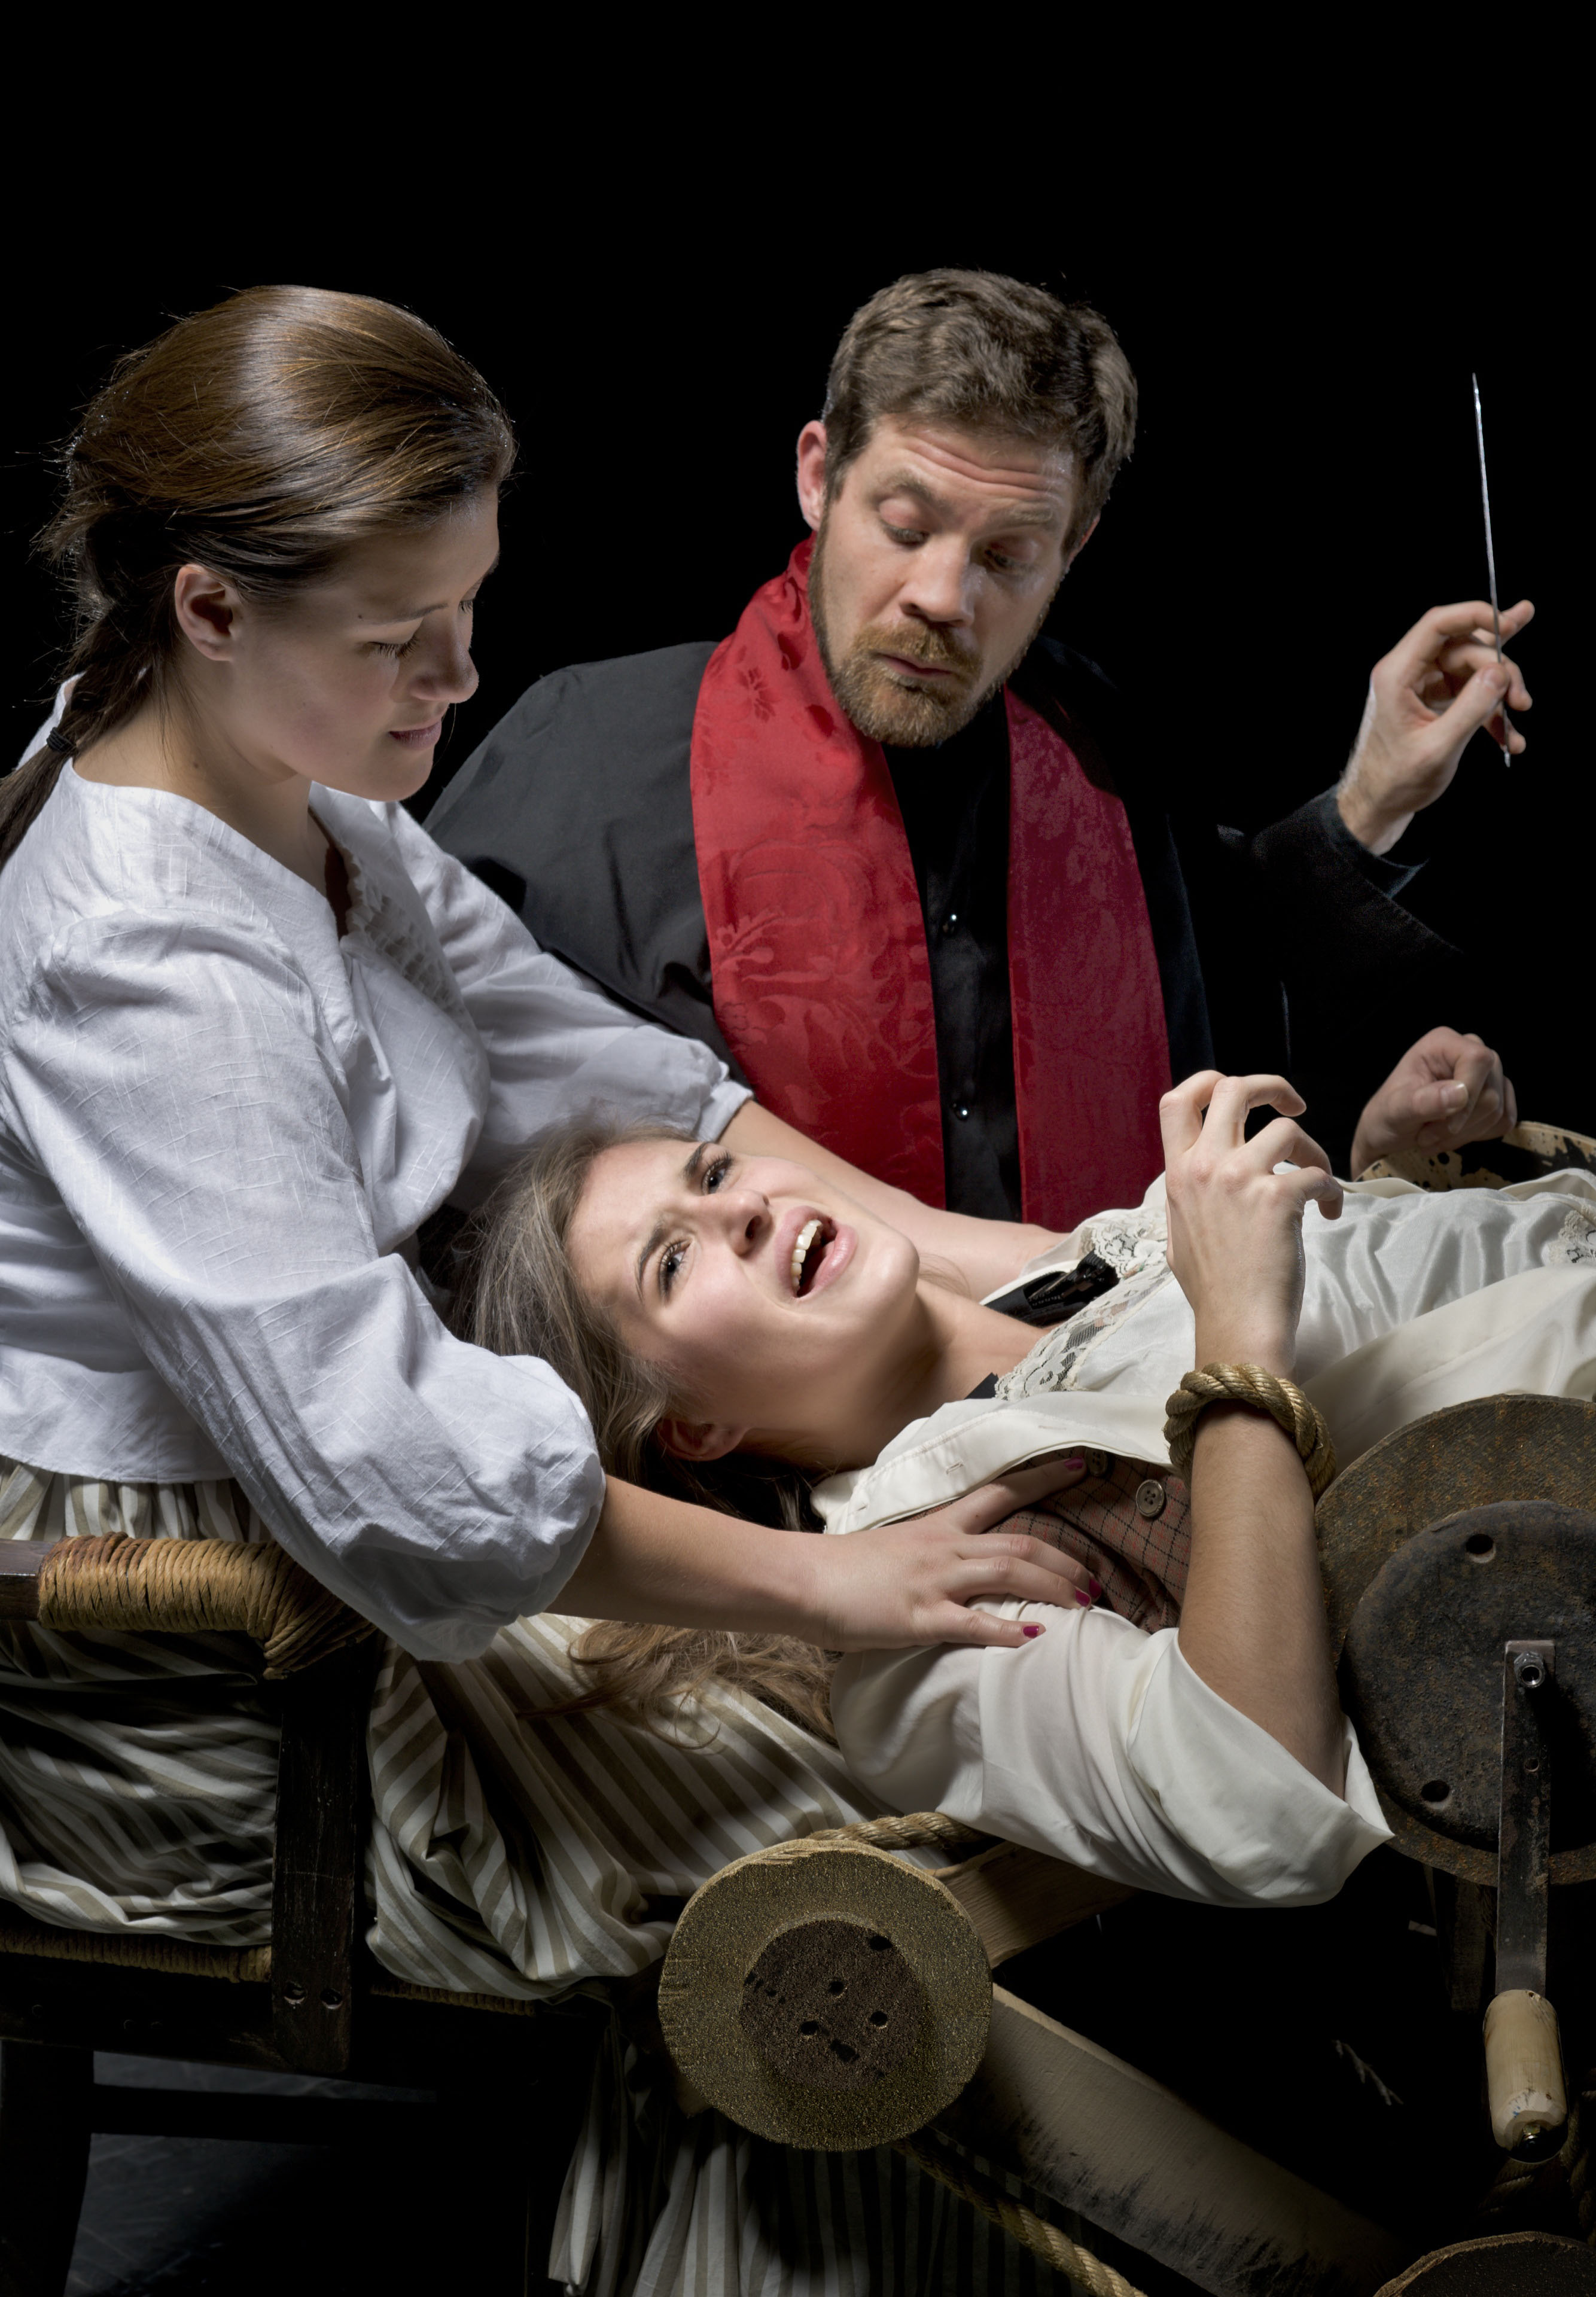 Packer (right, Mike Long), assisted by Goody (left, Kyle Hughes), attempts to prove that Joan (center, Anna McQuitty) is a witch during a play